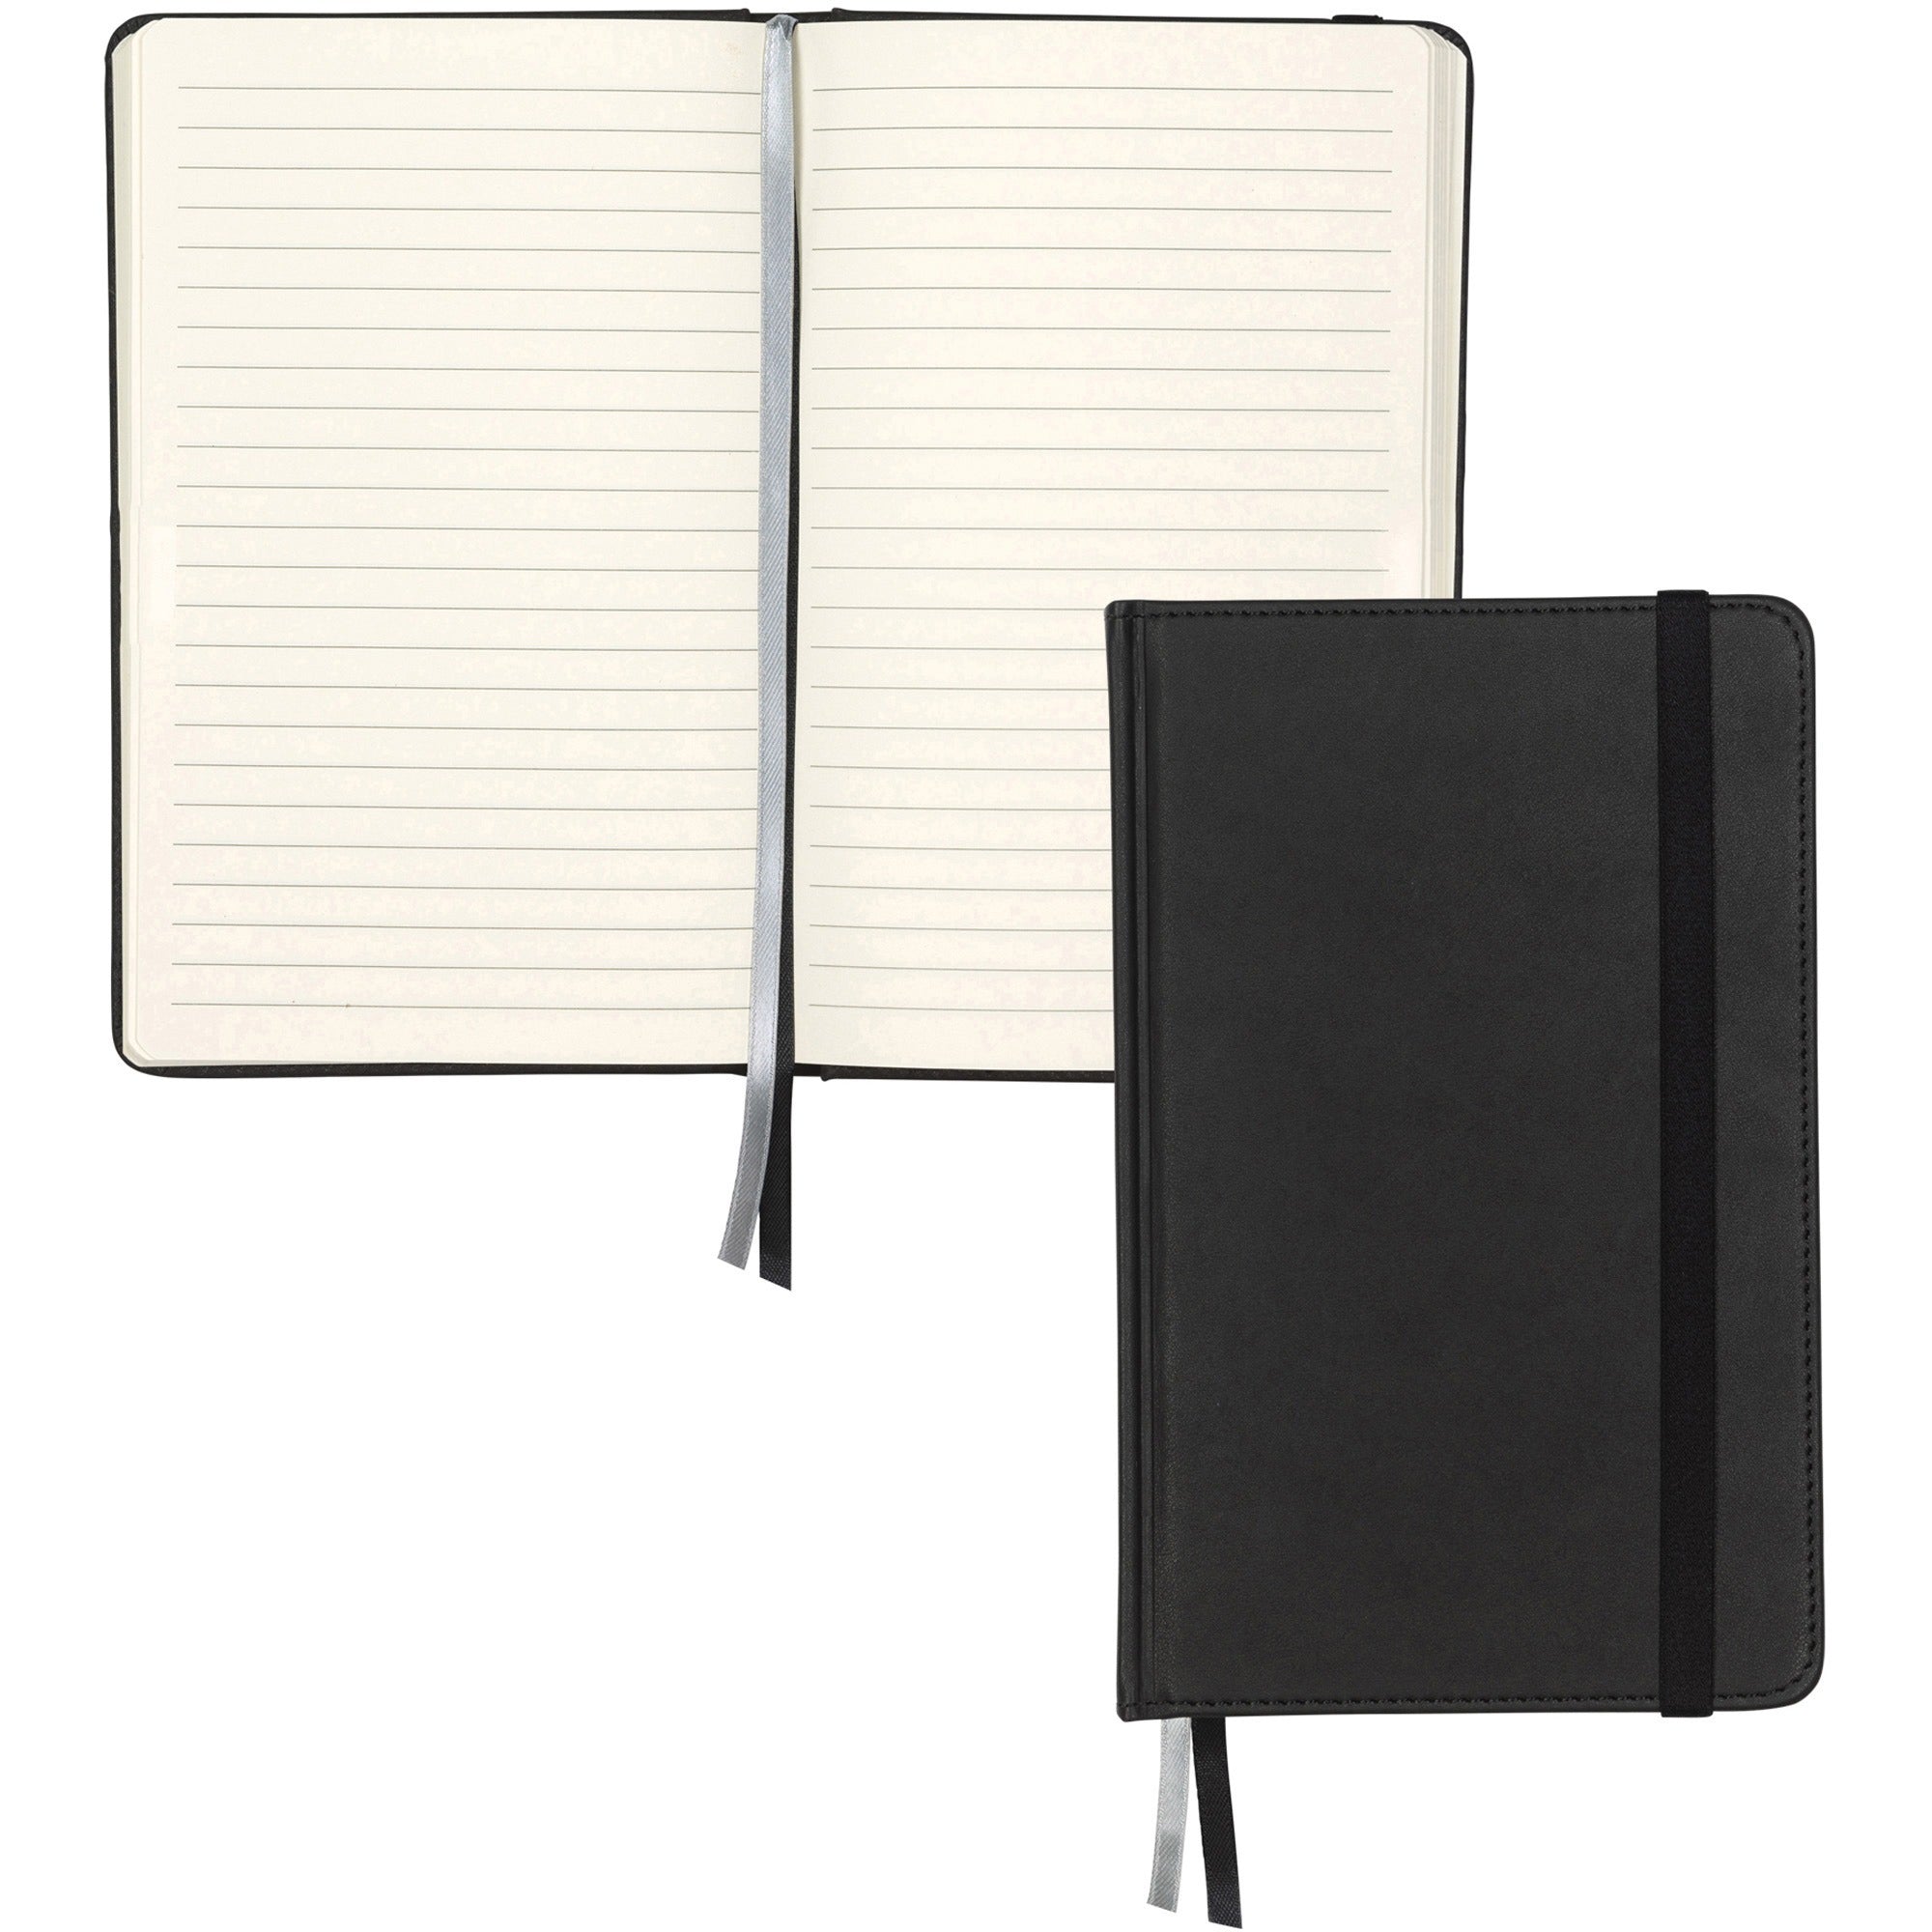 samsill-classic-journal-525-inch-x-825-inch-black-samsill-classic-size-writing-notebook-journal-hardbound-cover-525-inch-x-825-inch-120-ruled-sheets-240-pages-black_sam22300 - 1